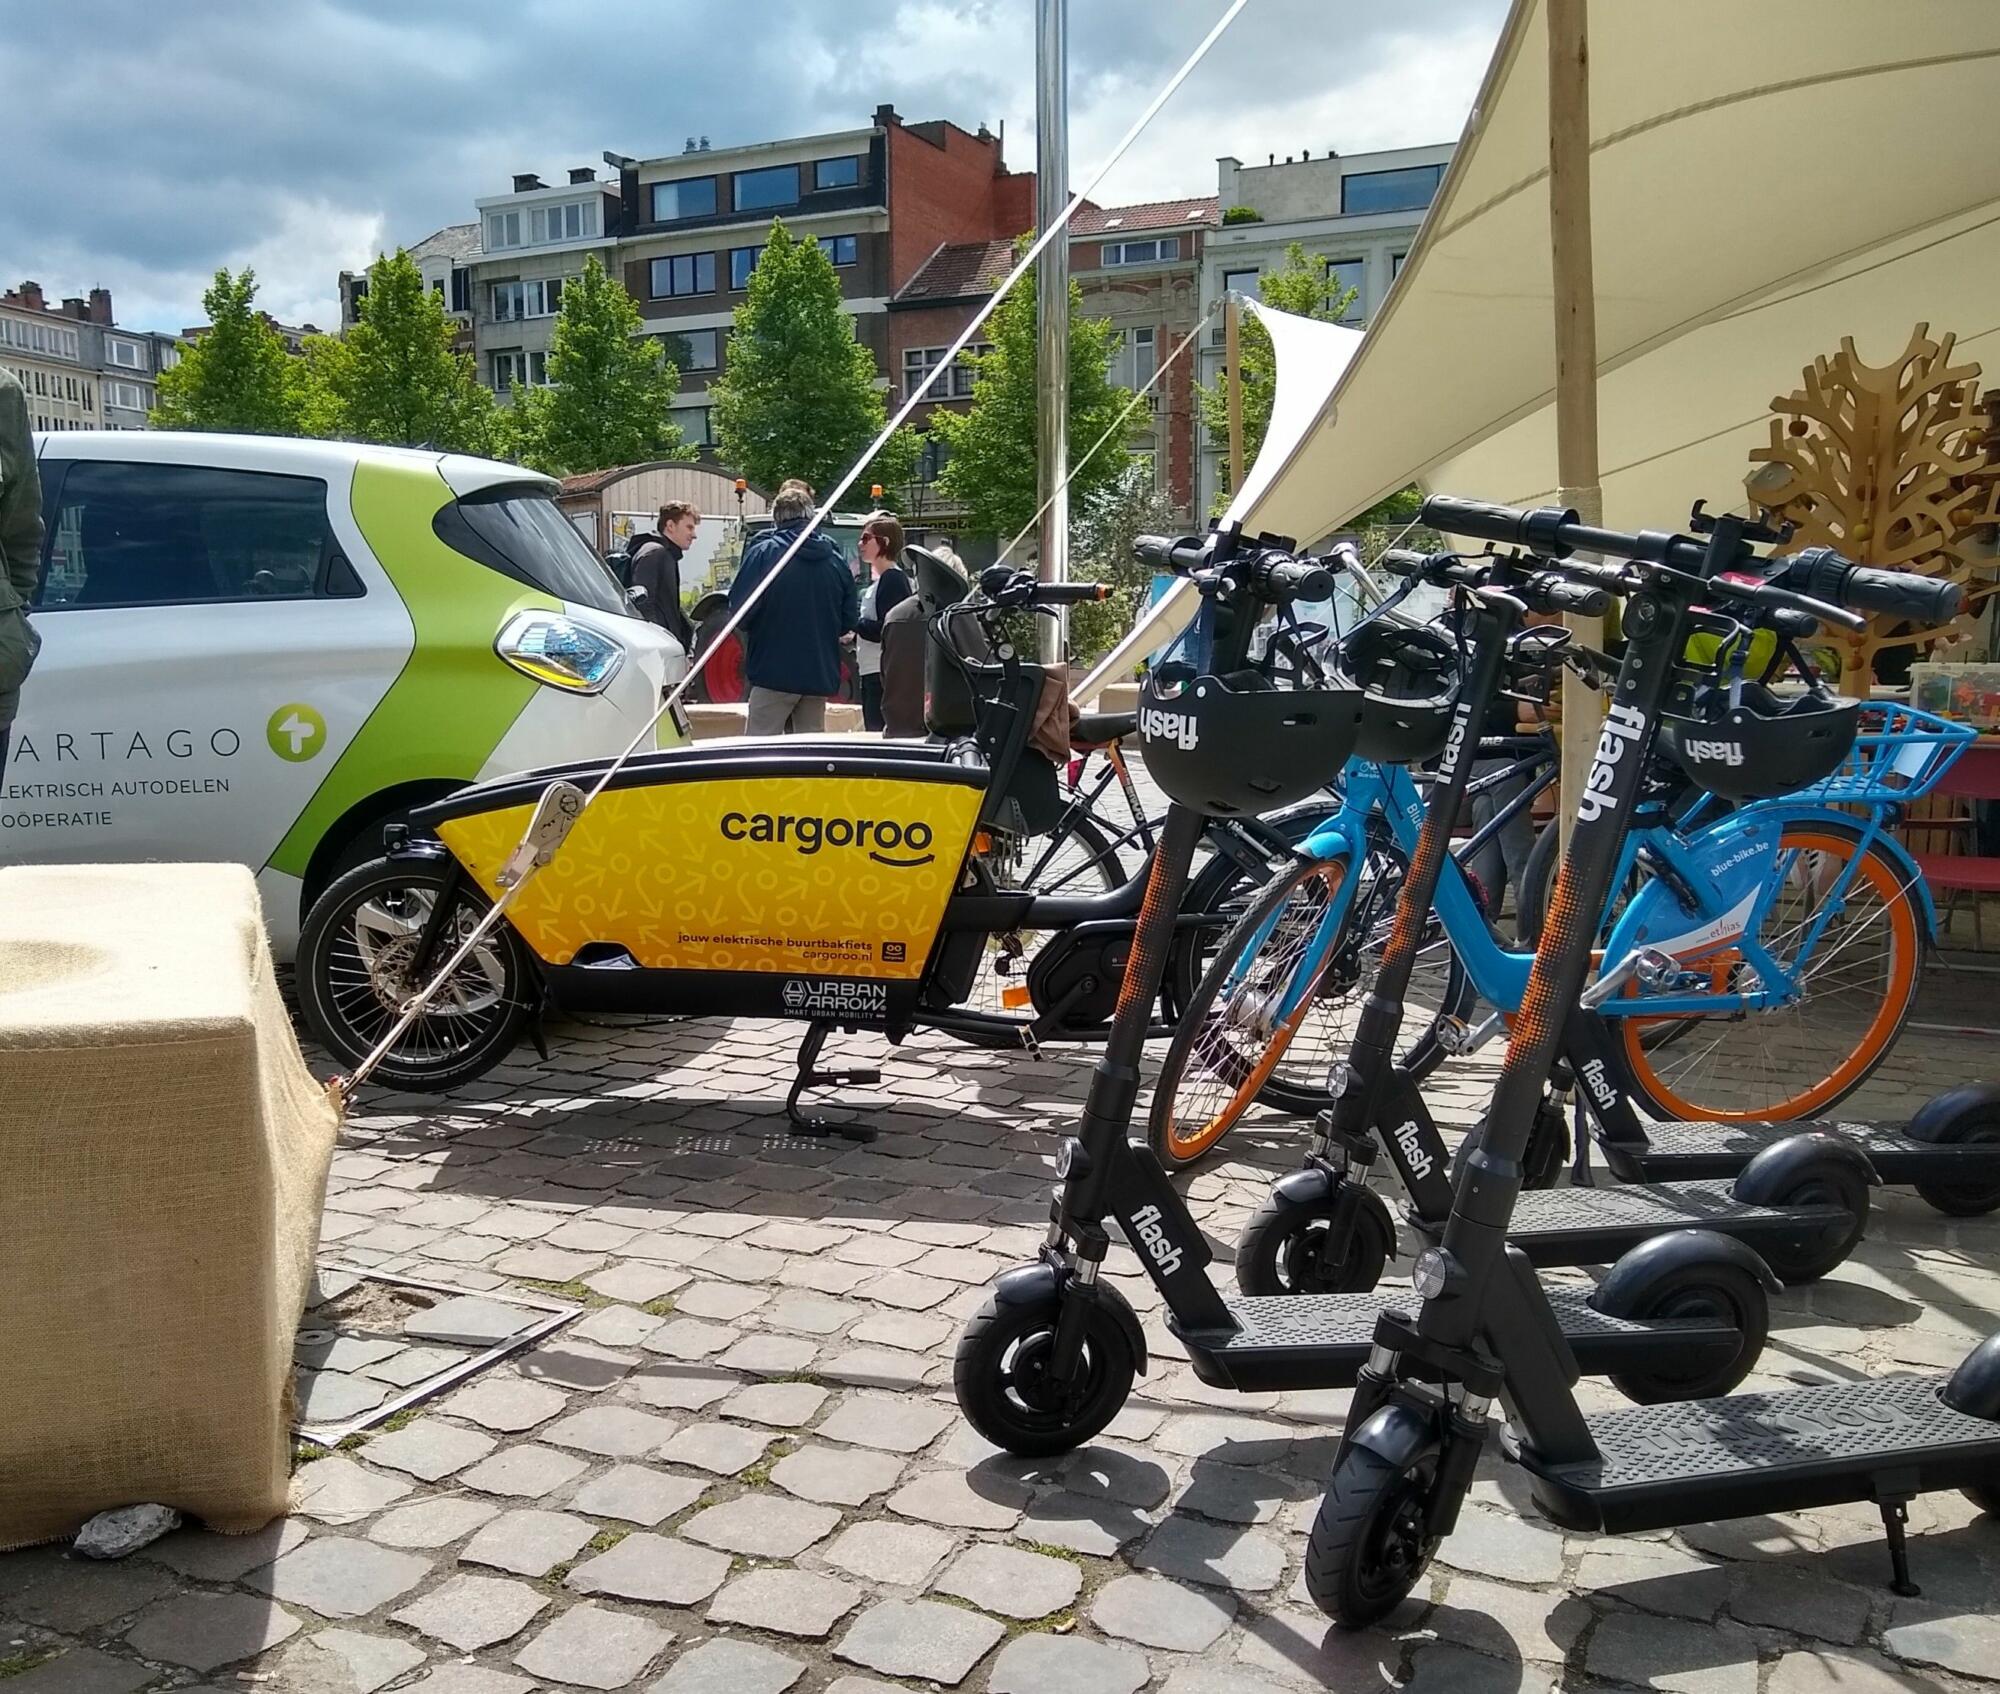 Dublin is looking for best practices to promote shared mobility in the workplace